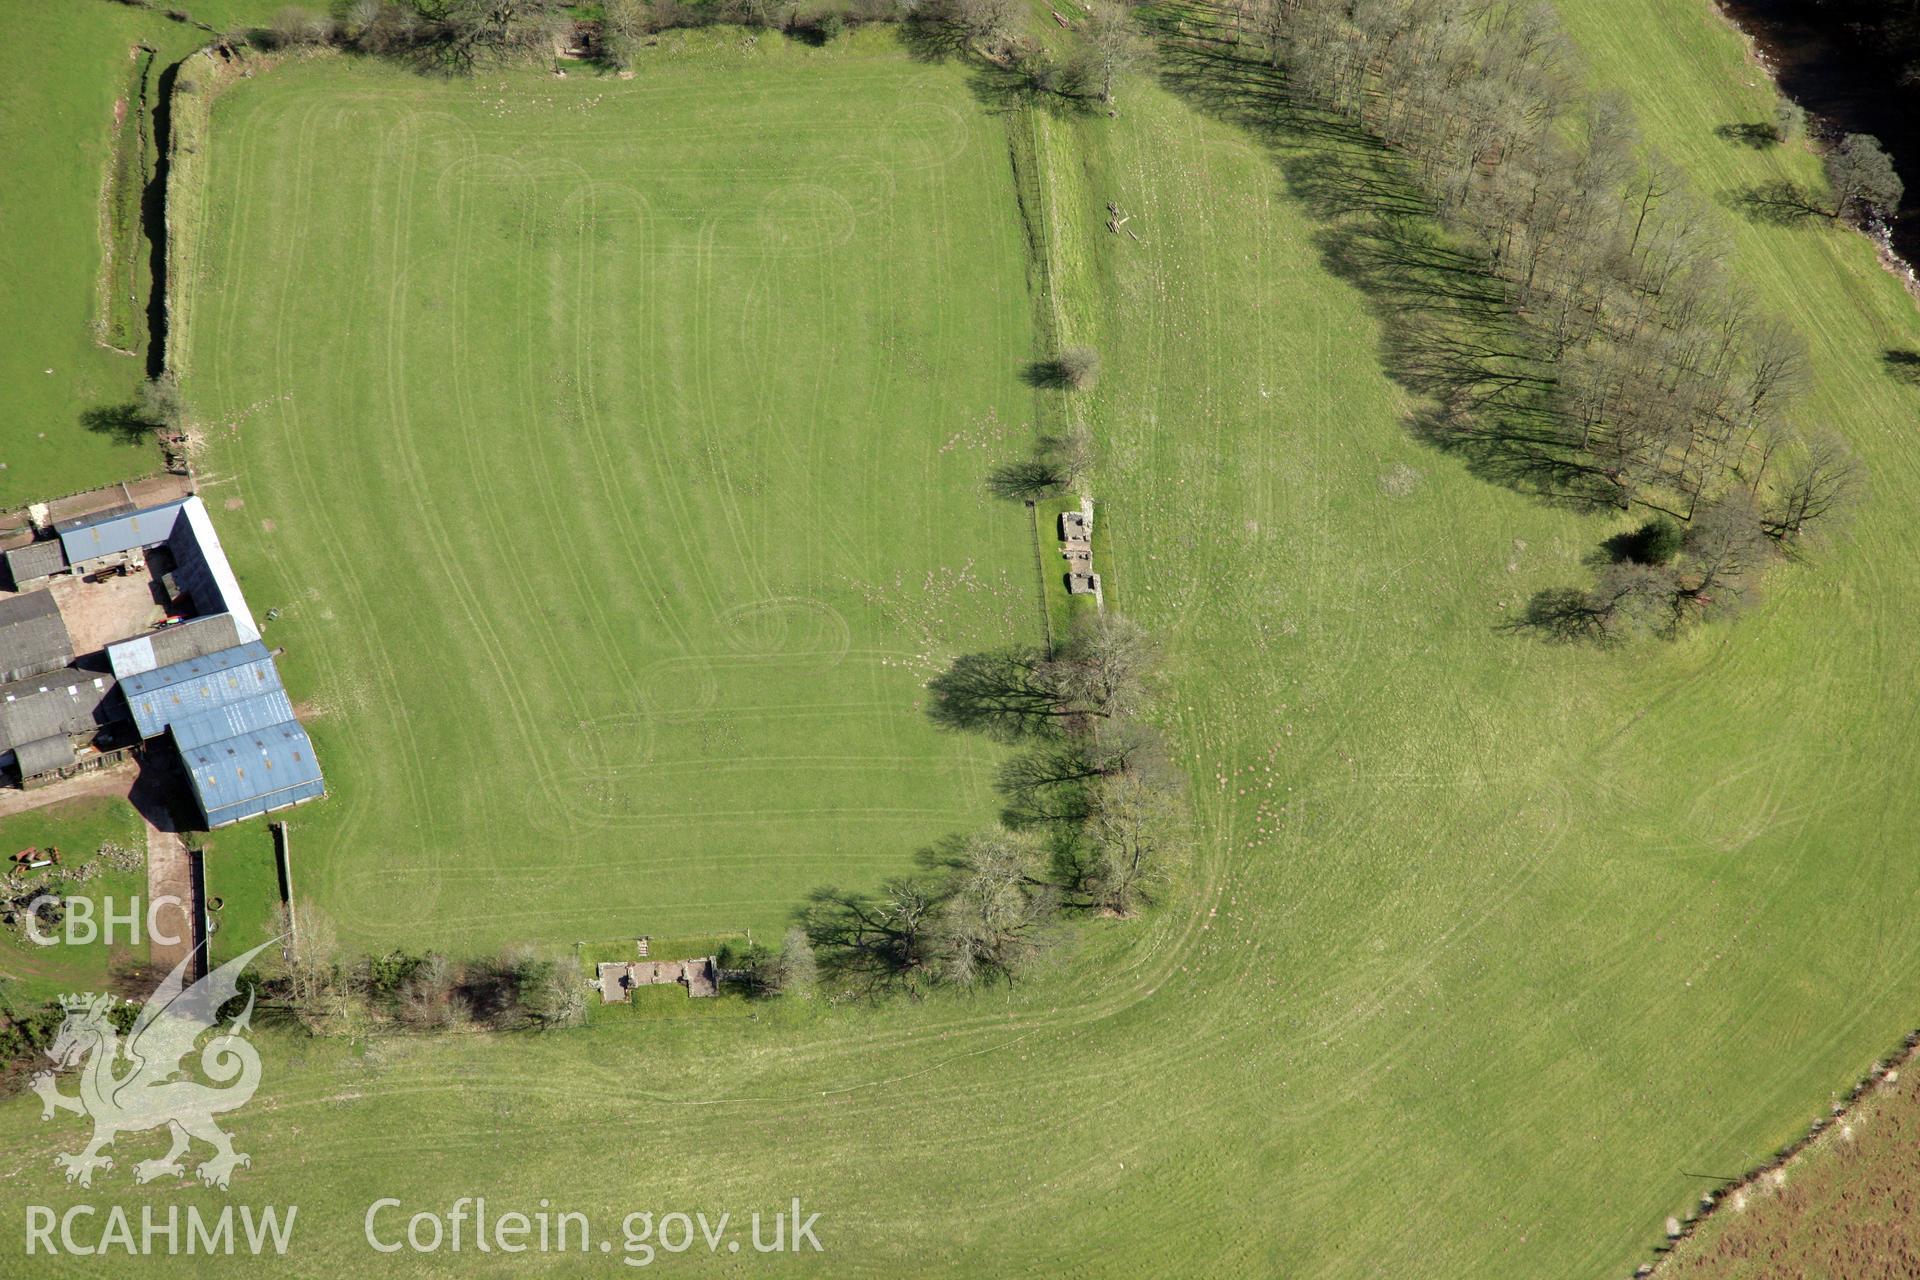 RCAHMW colour oblique photograph of Brecon Gaer Roman fort. Taken by Toby Driver and Oliver Davies on 28/03/2012.